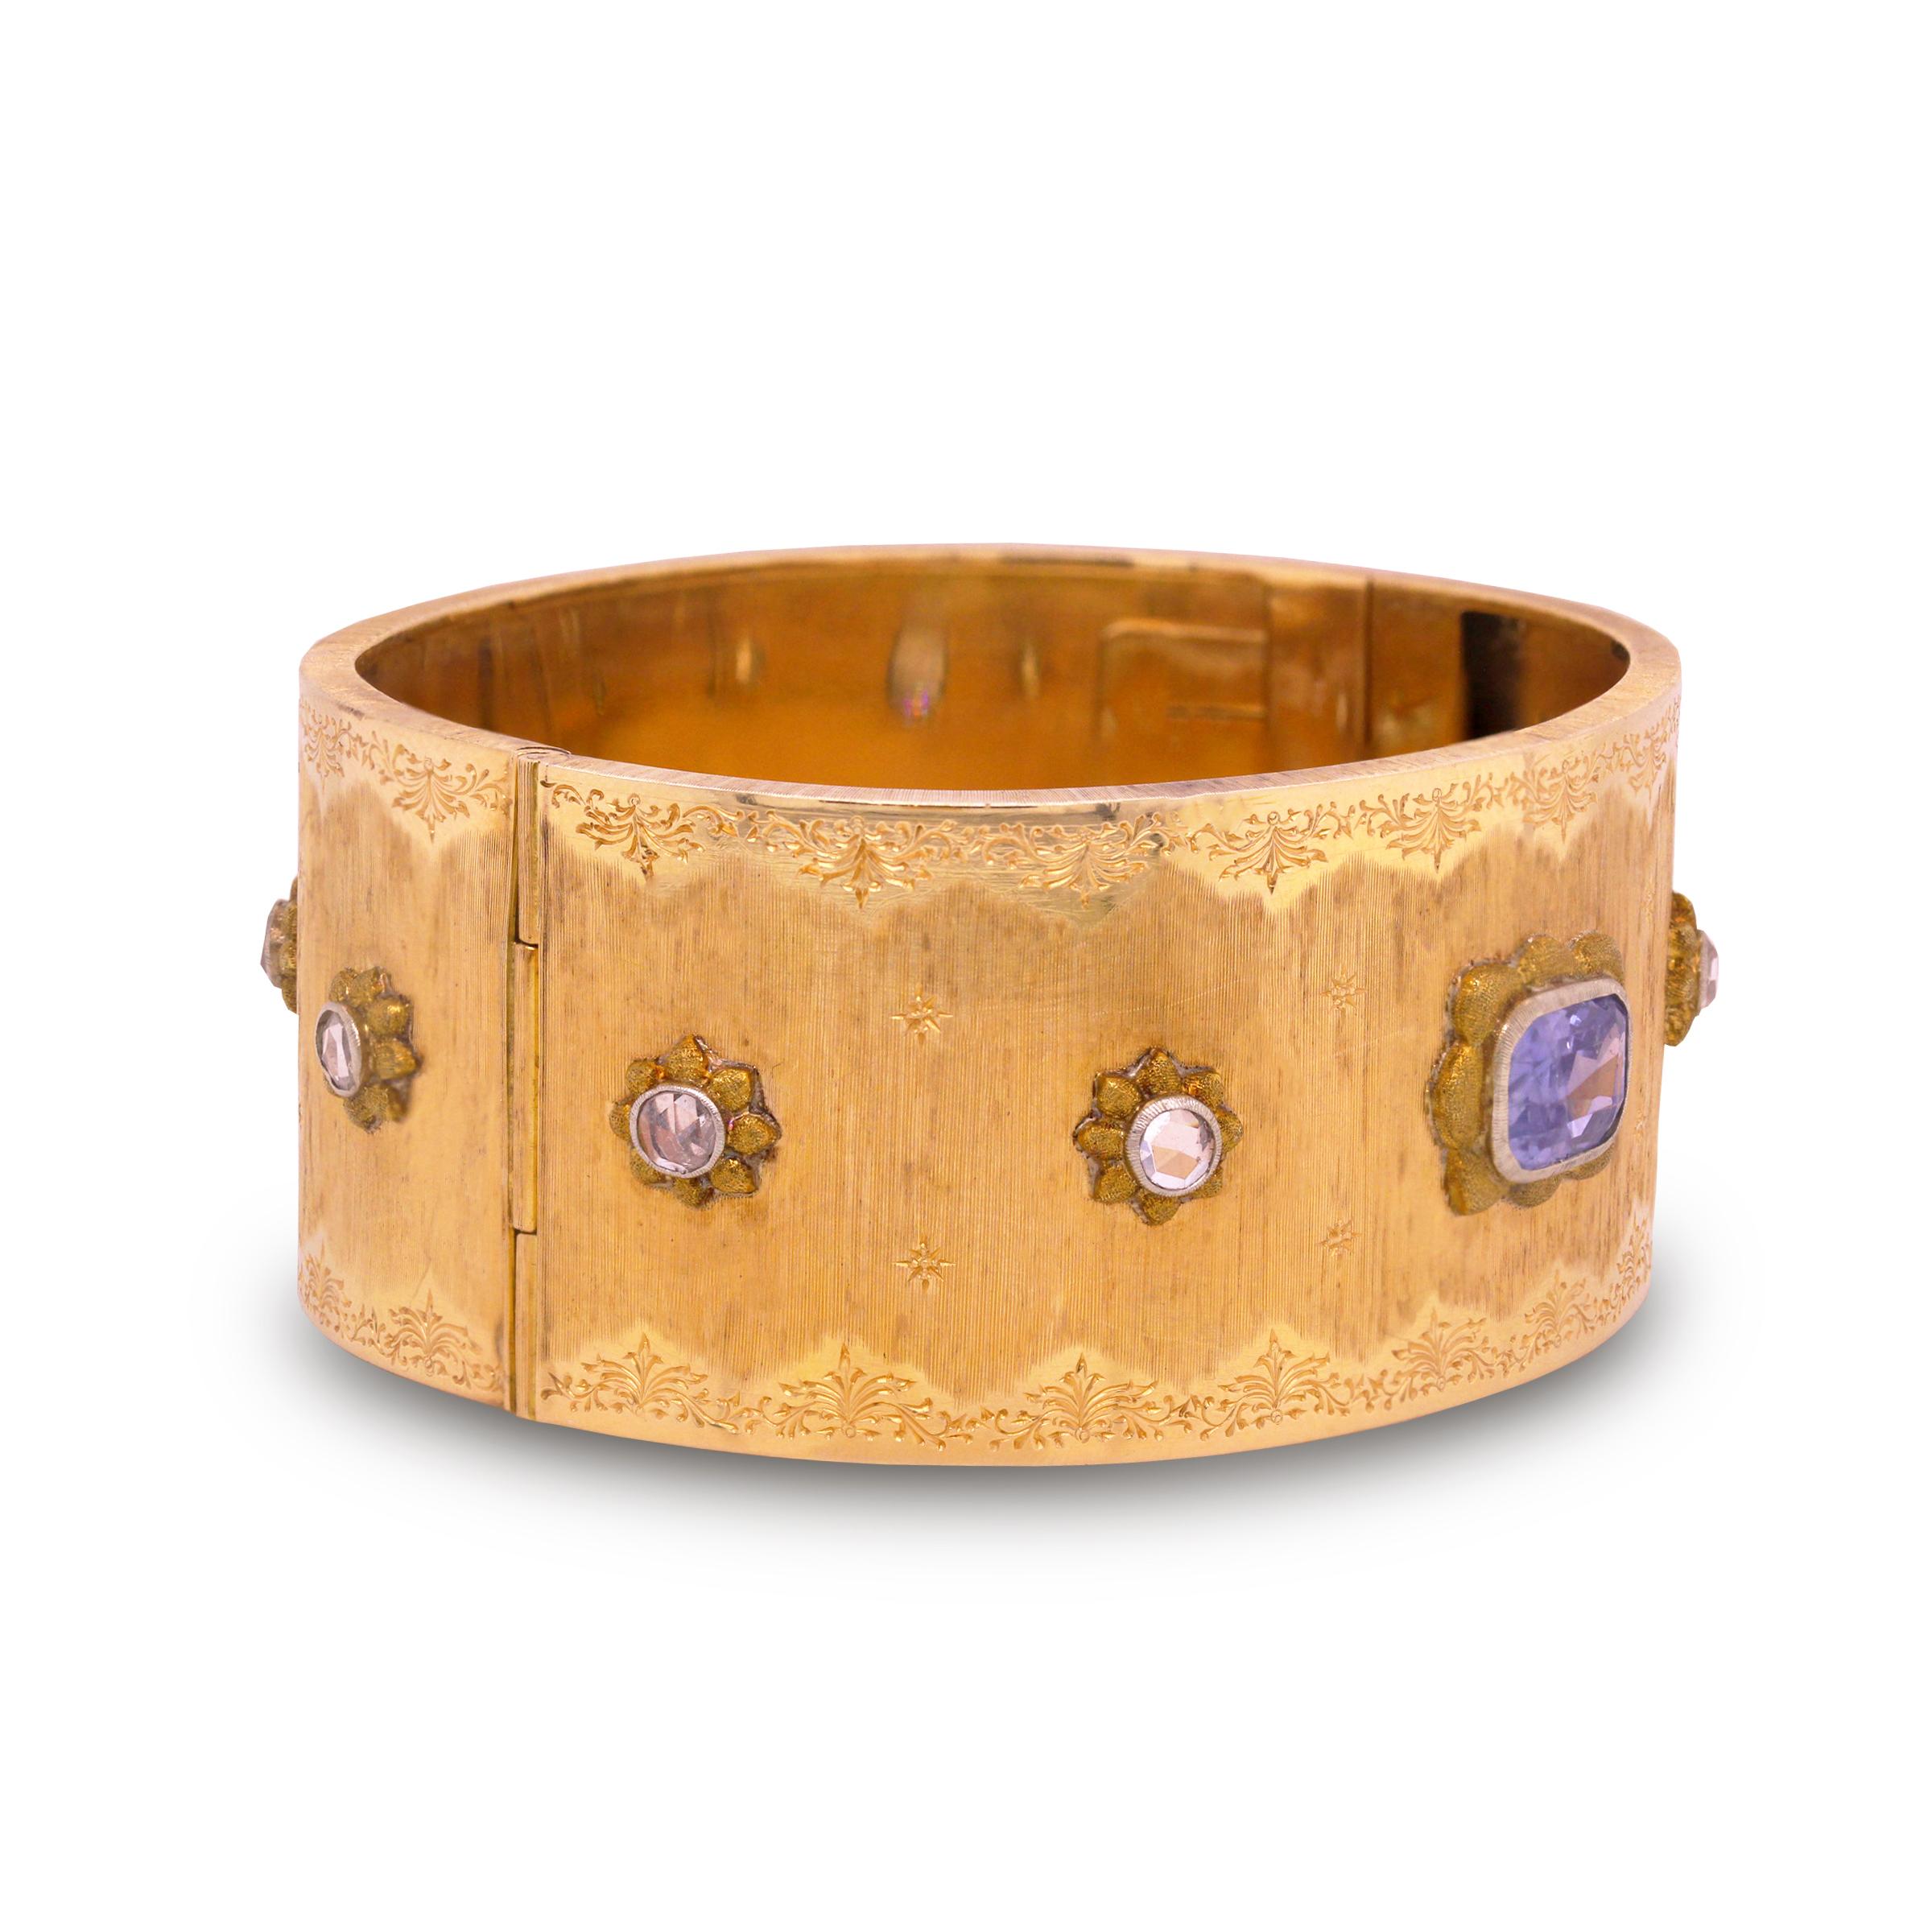 18K Yellow Gold Cuff Bangle Bracelet by Buccellati with Rose Cut Diamonds and No Heat Blue Sapphire Center

This state-of-the-art cuff bracelet by italian jewelry house, Buccellati is truly an incredibly handcrafted piece

All hand engraved with